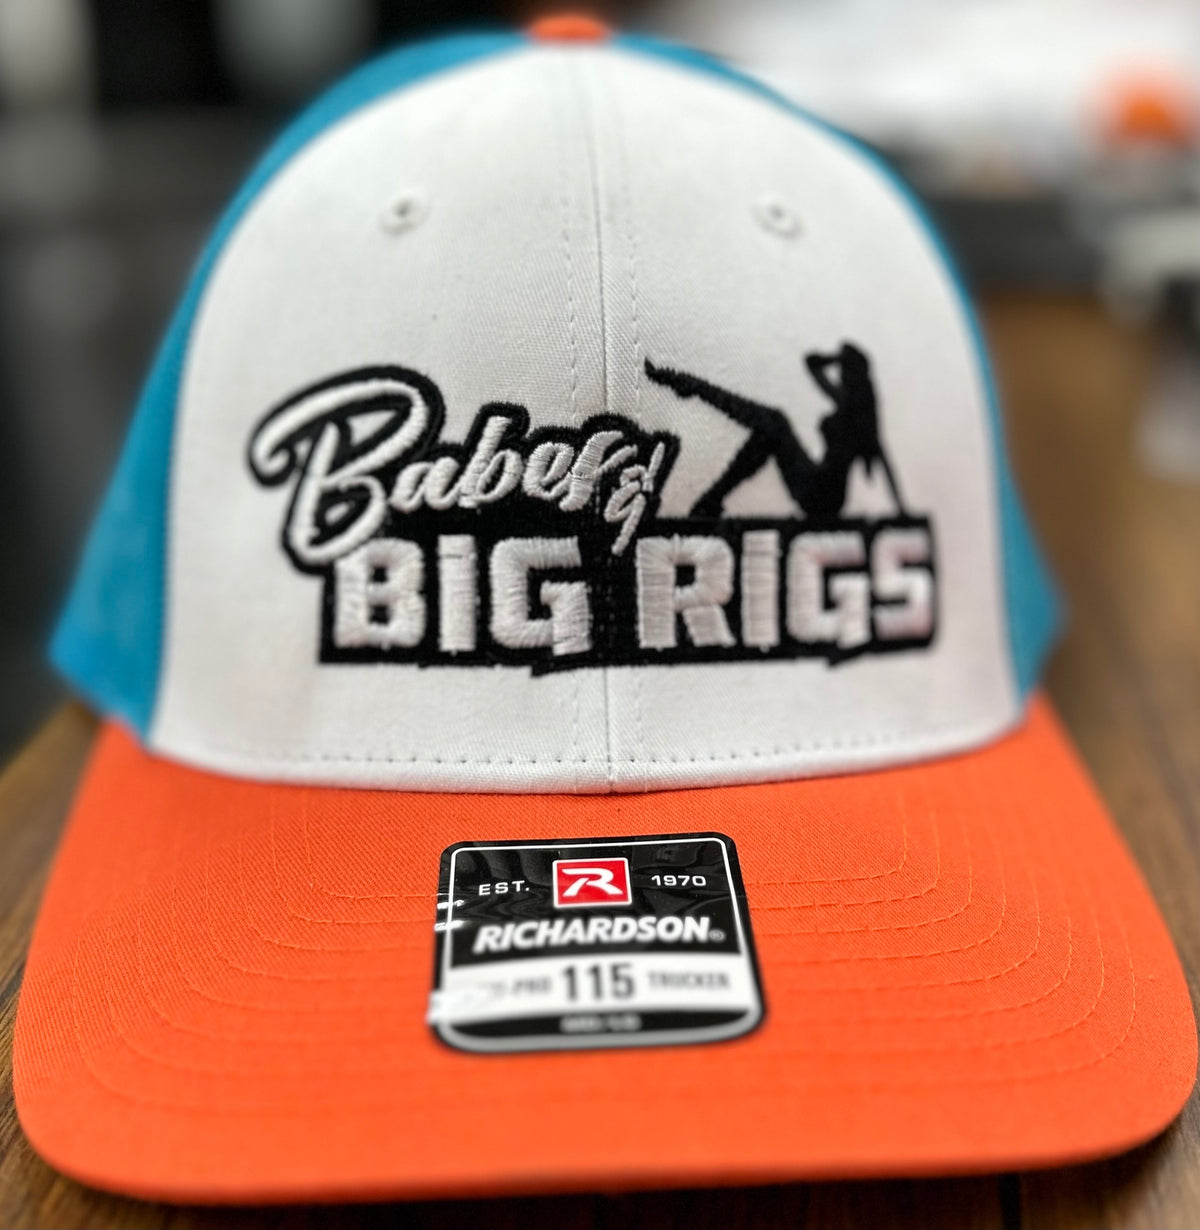 Babes and Big Rigs Trucker Hats